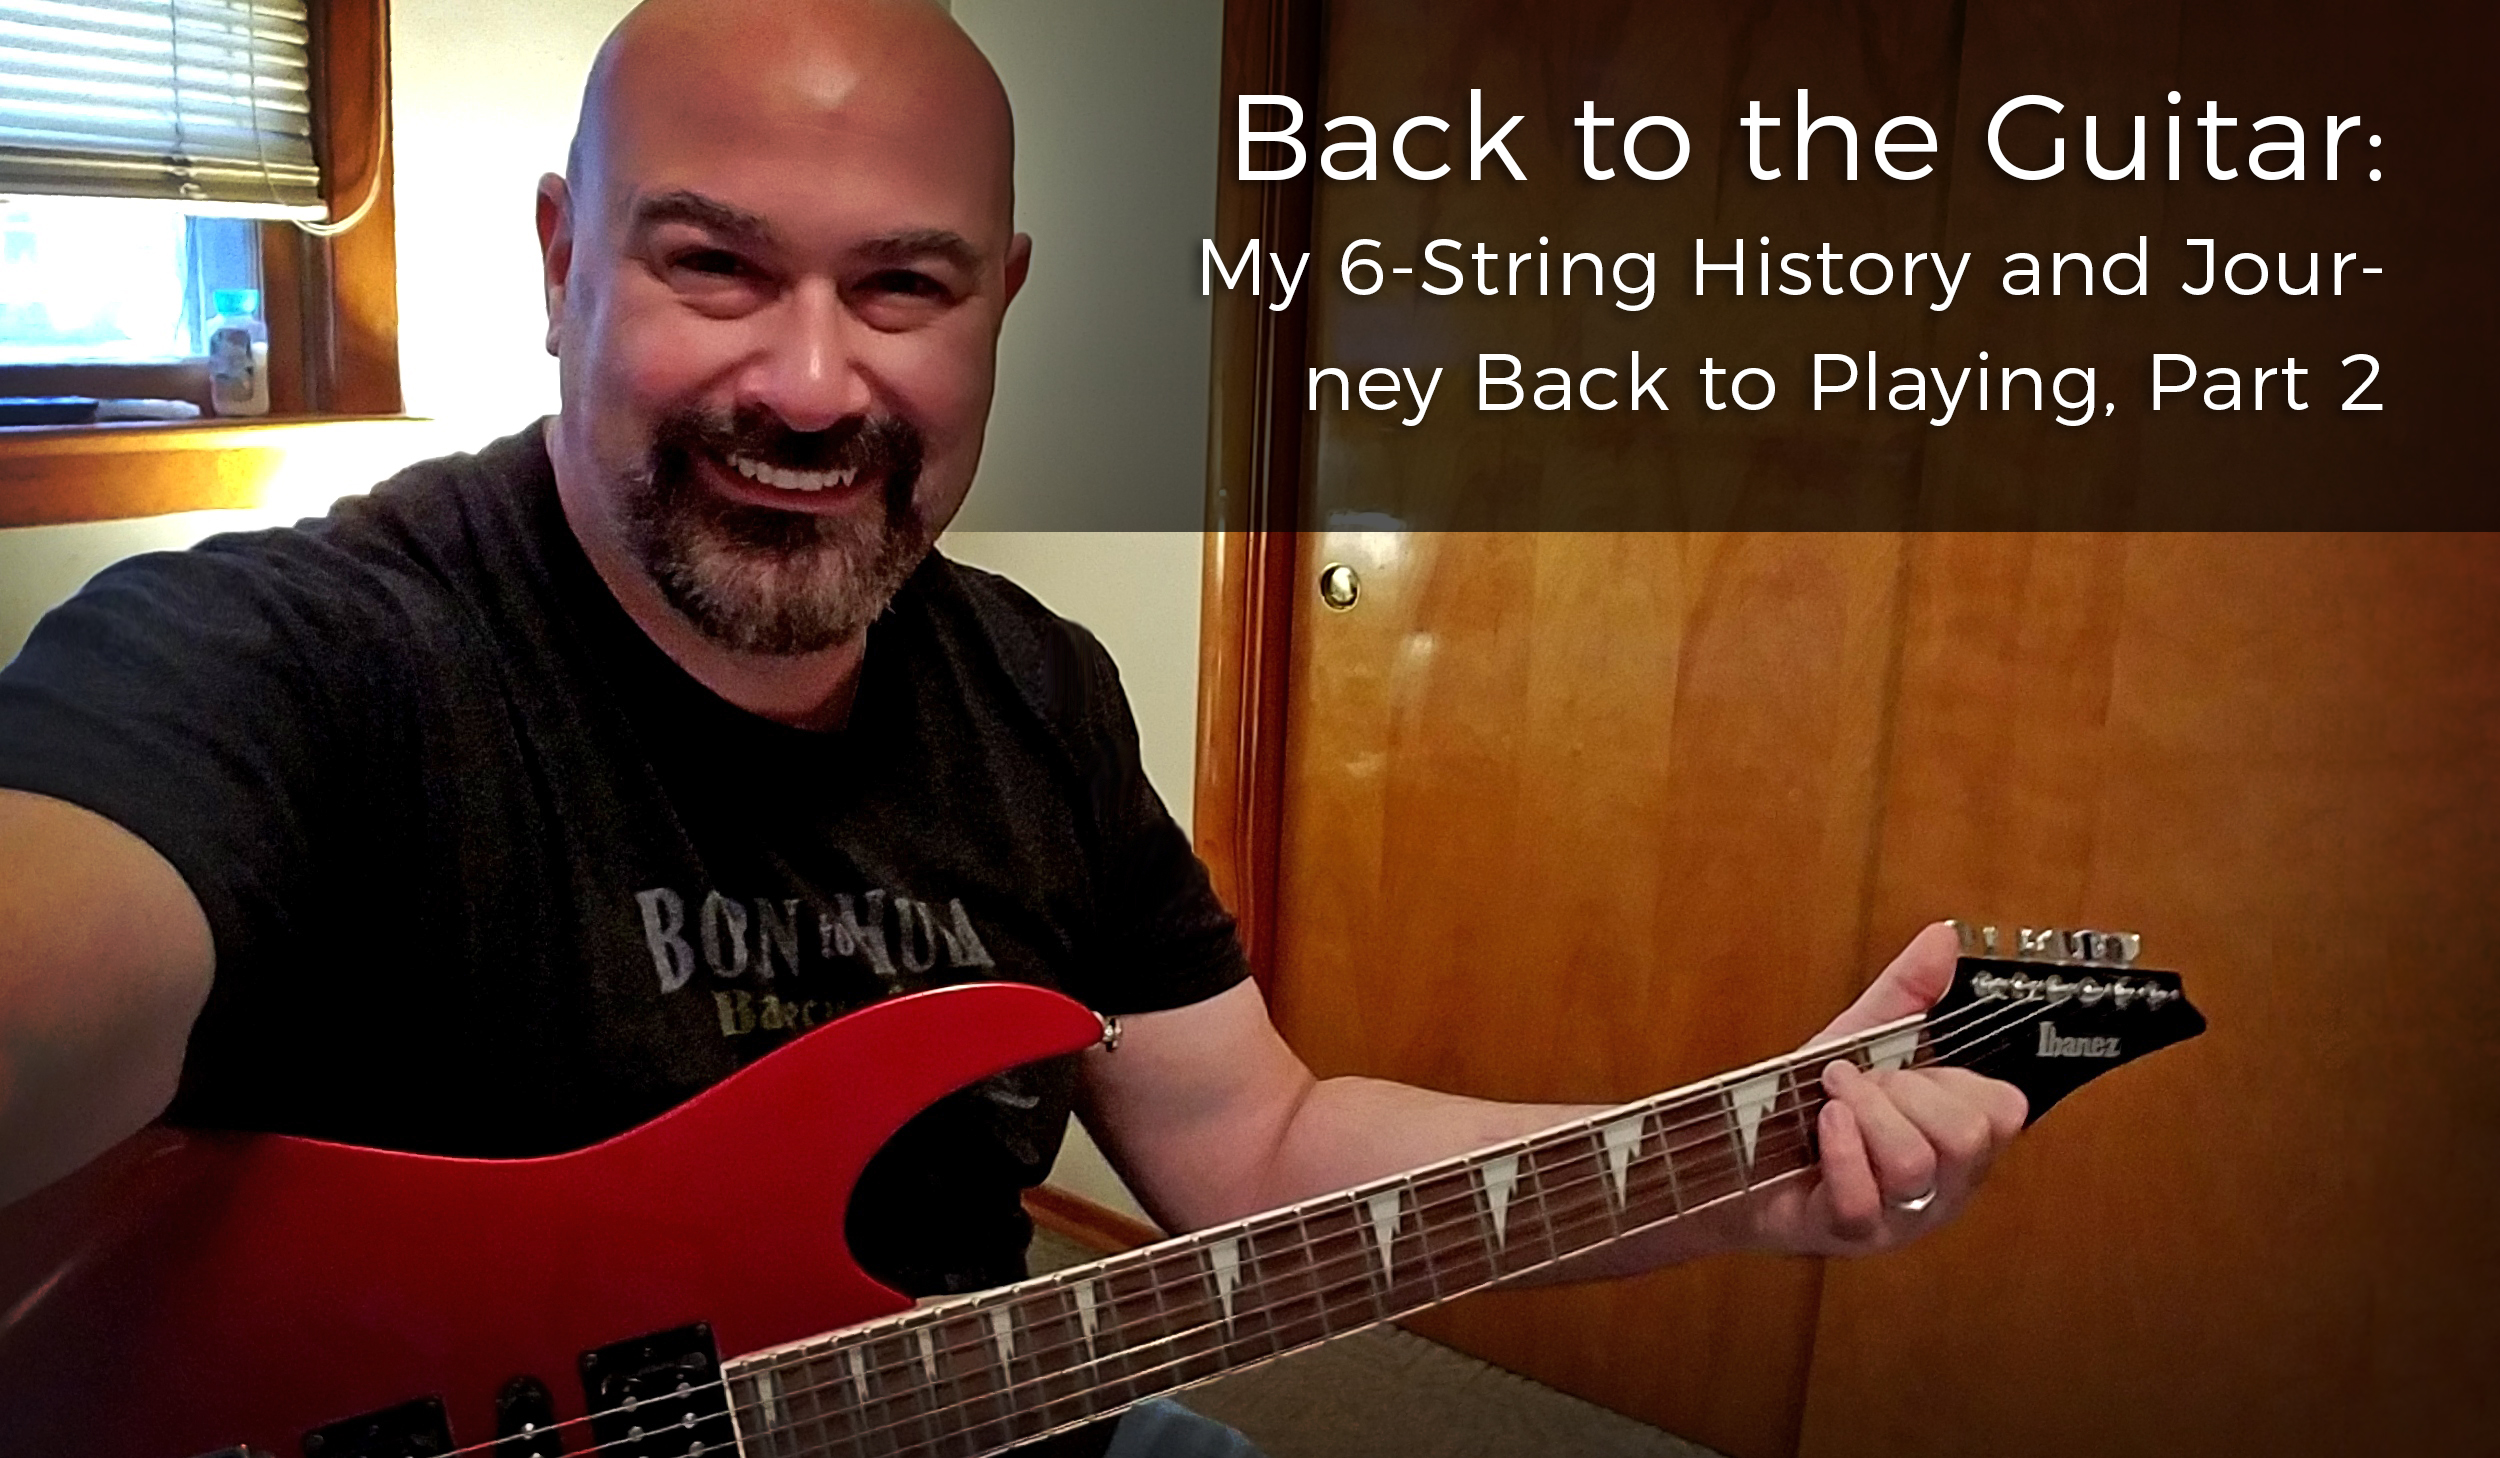 back-to-the-guitar-my-6-string-journey-back-to-playing-part-2-scott-roberts